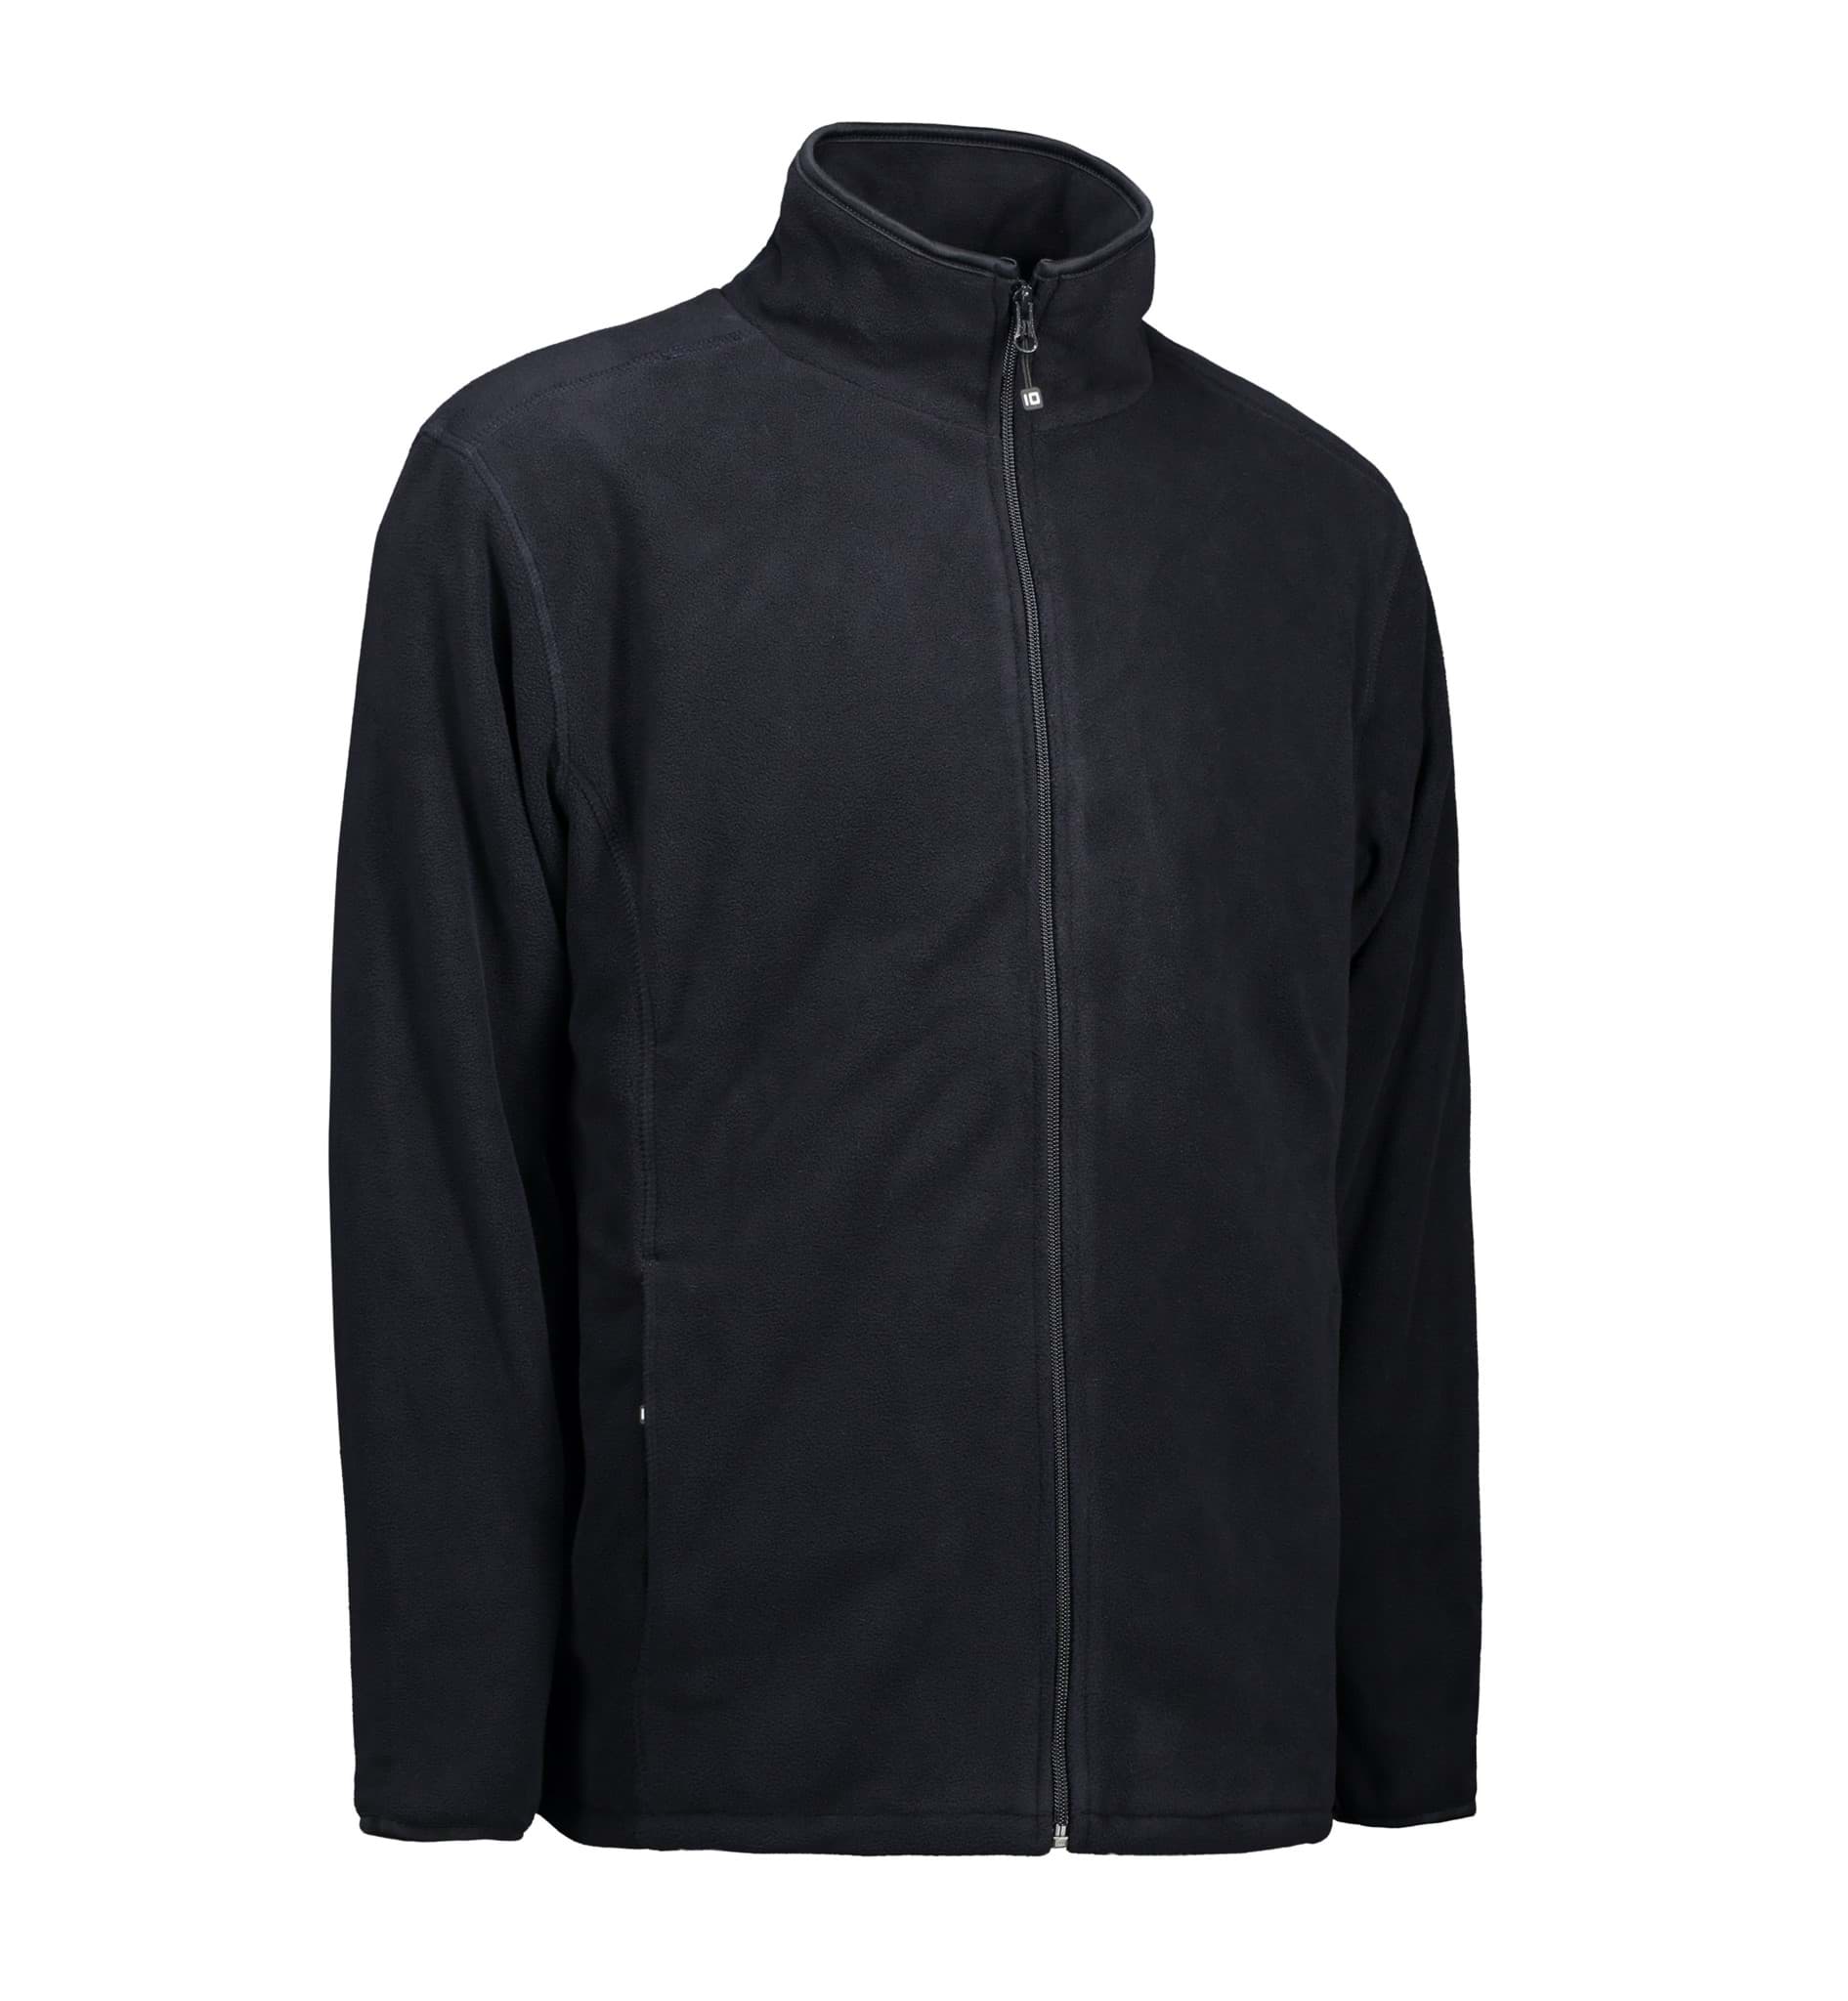 Picture of Microfleece men's jacket with inner lining